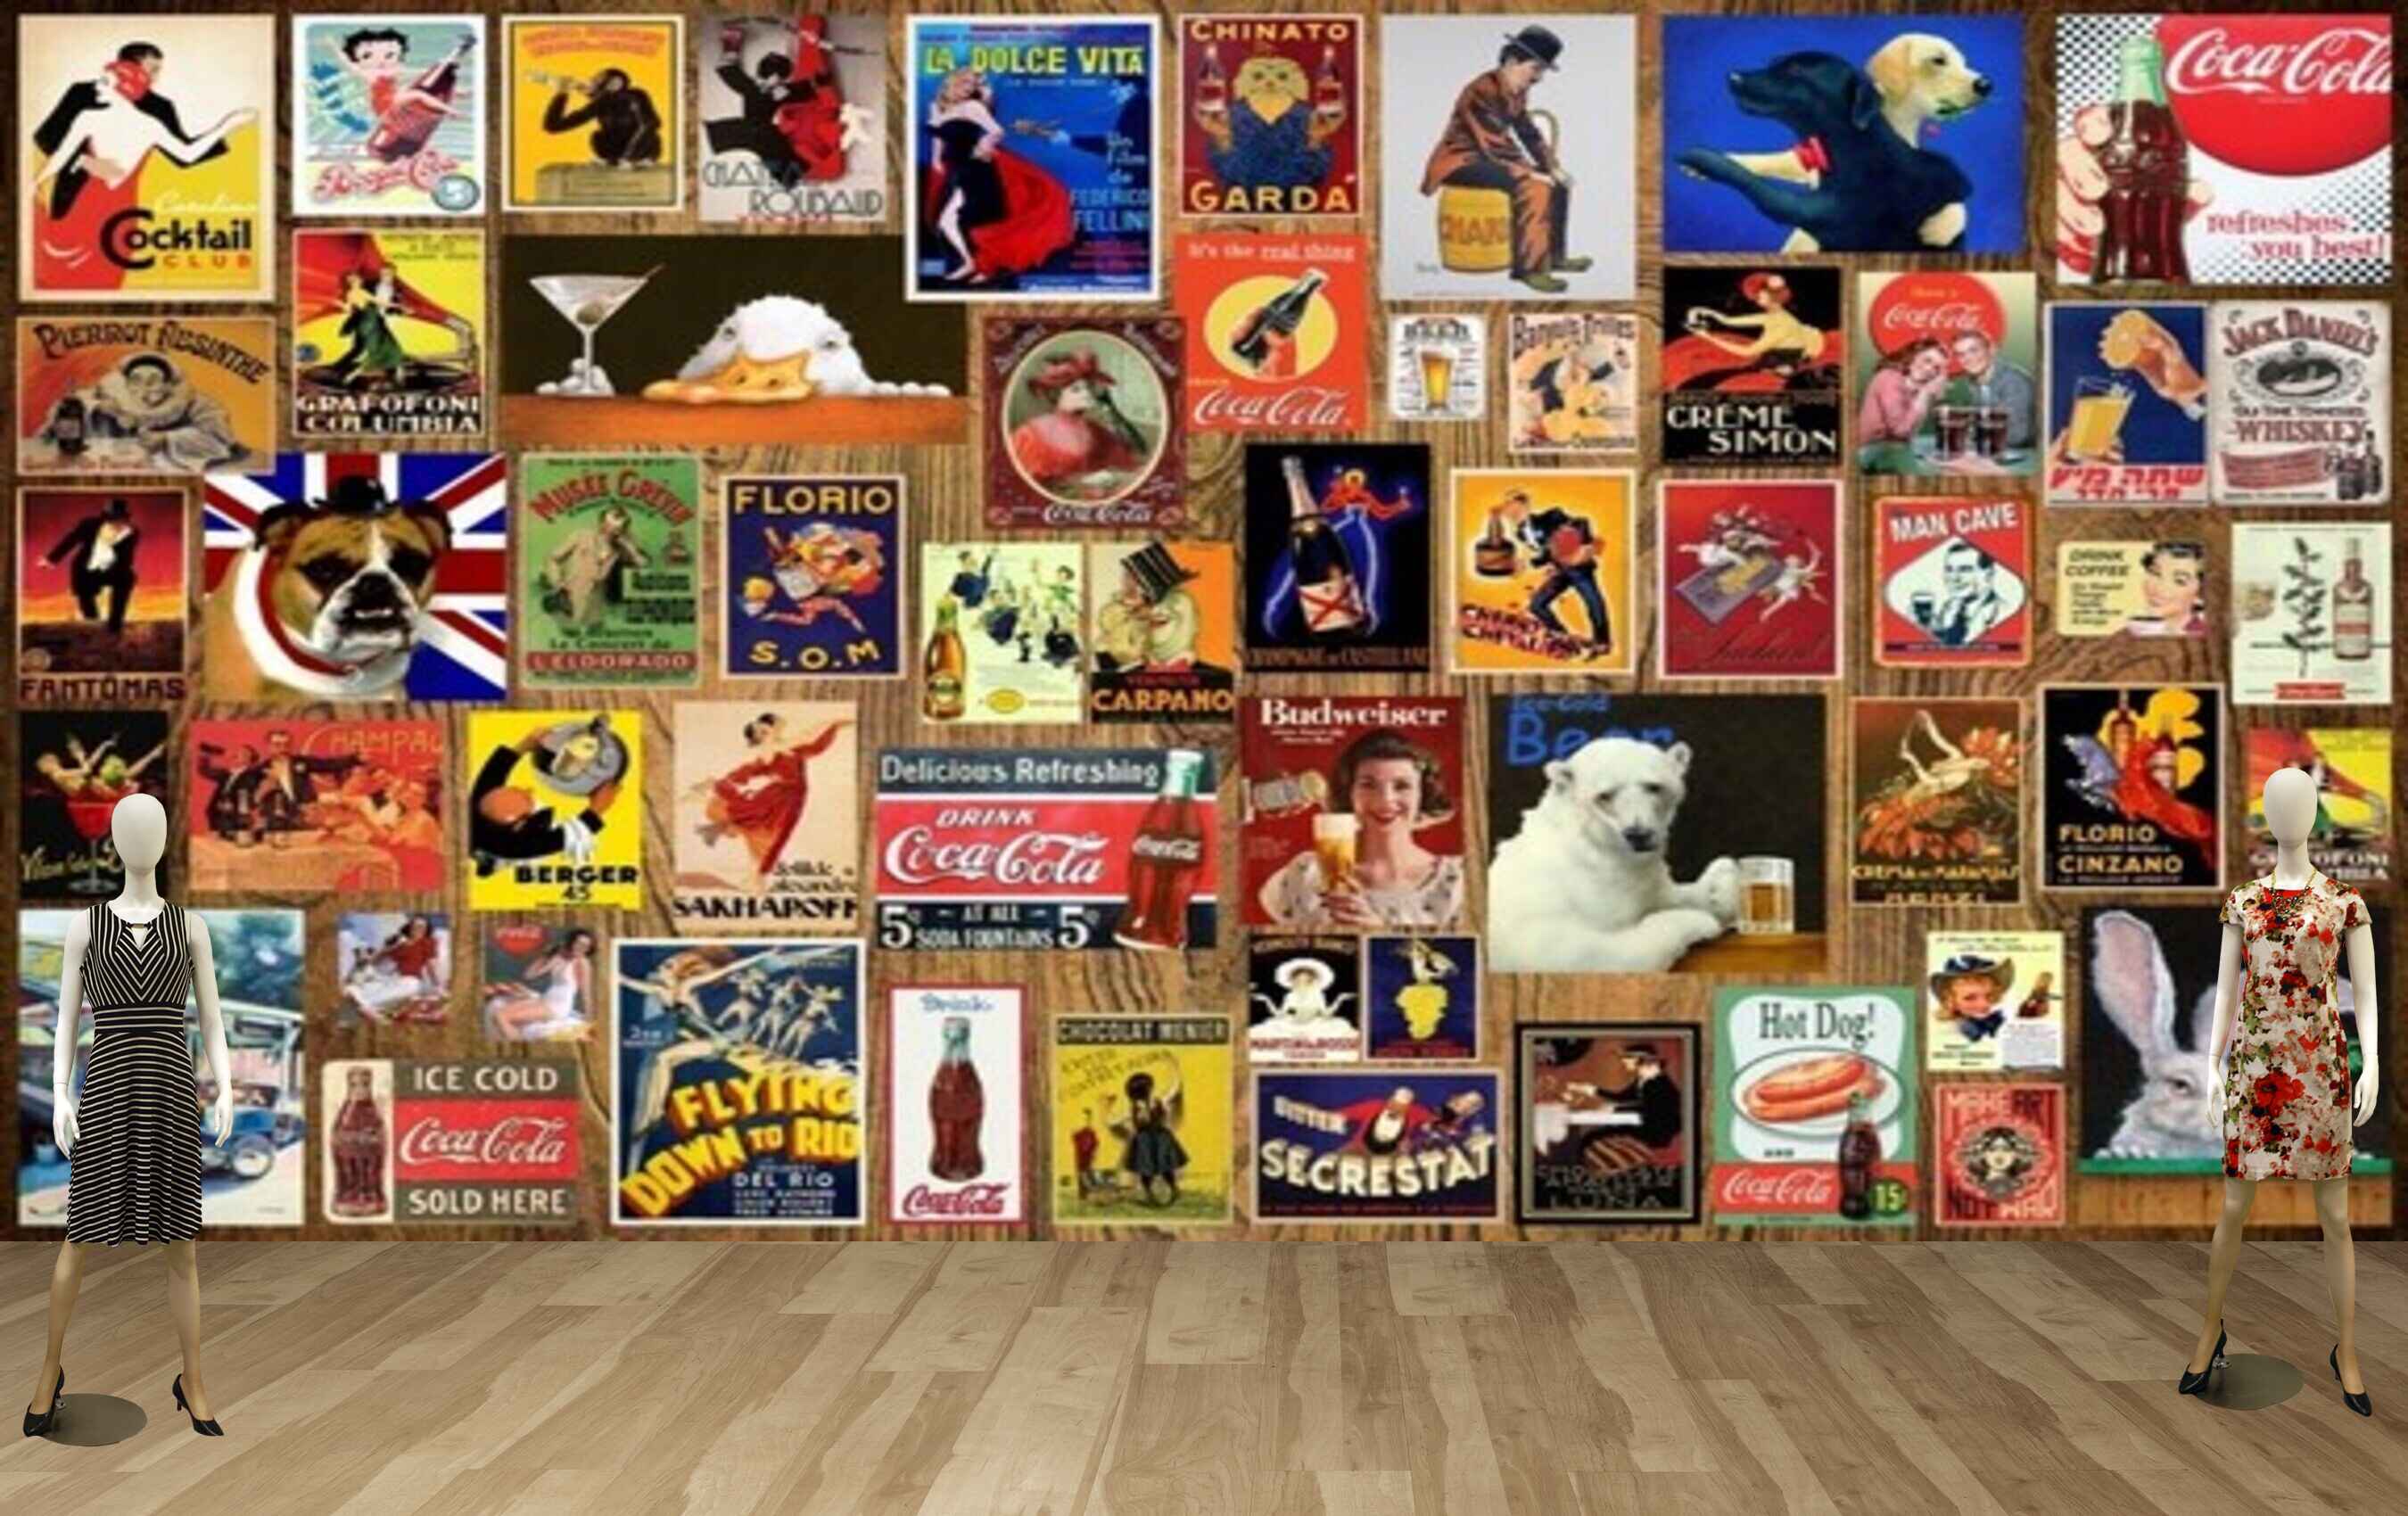 Avikalp MWZ3603 Cococola Dogs animals Persons Photo Frames HD Wallpaper for Gym Fitness